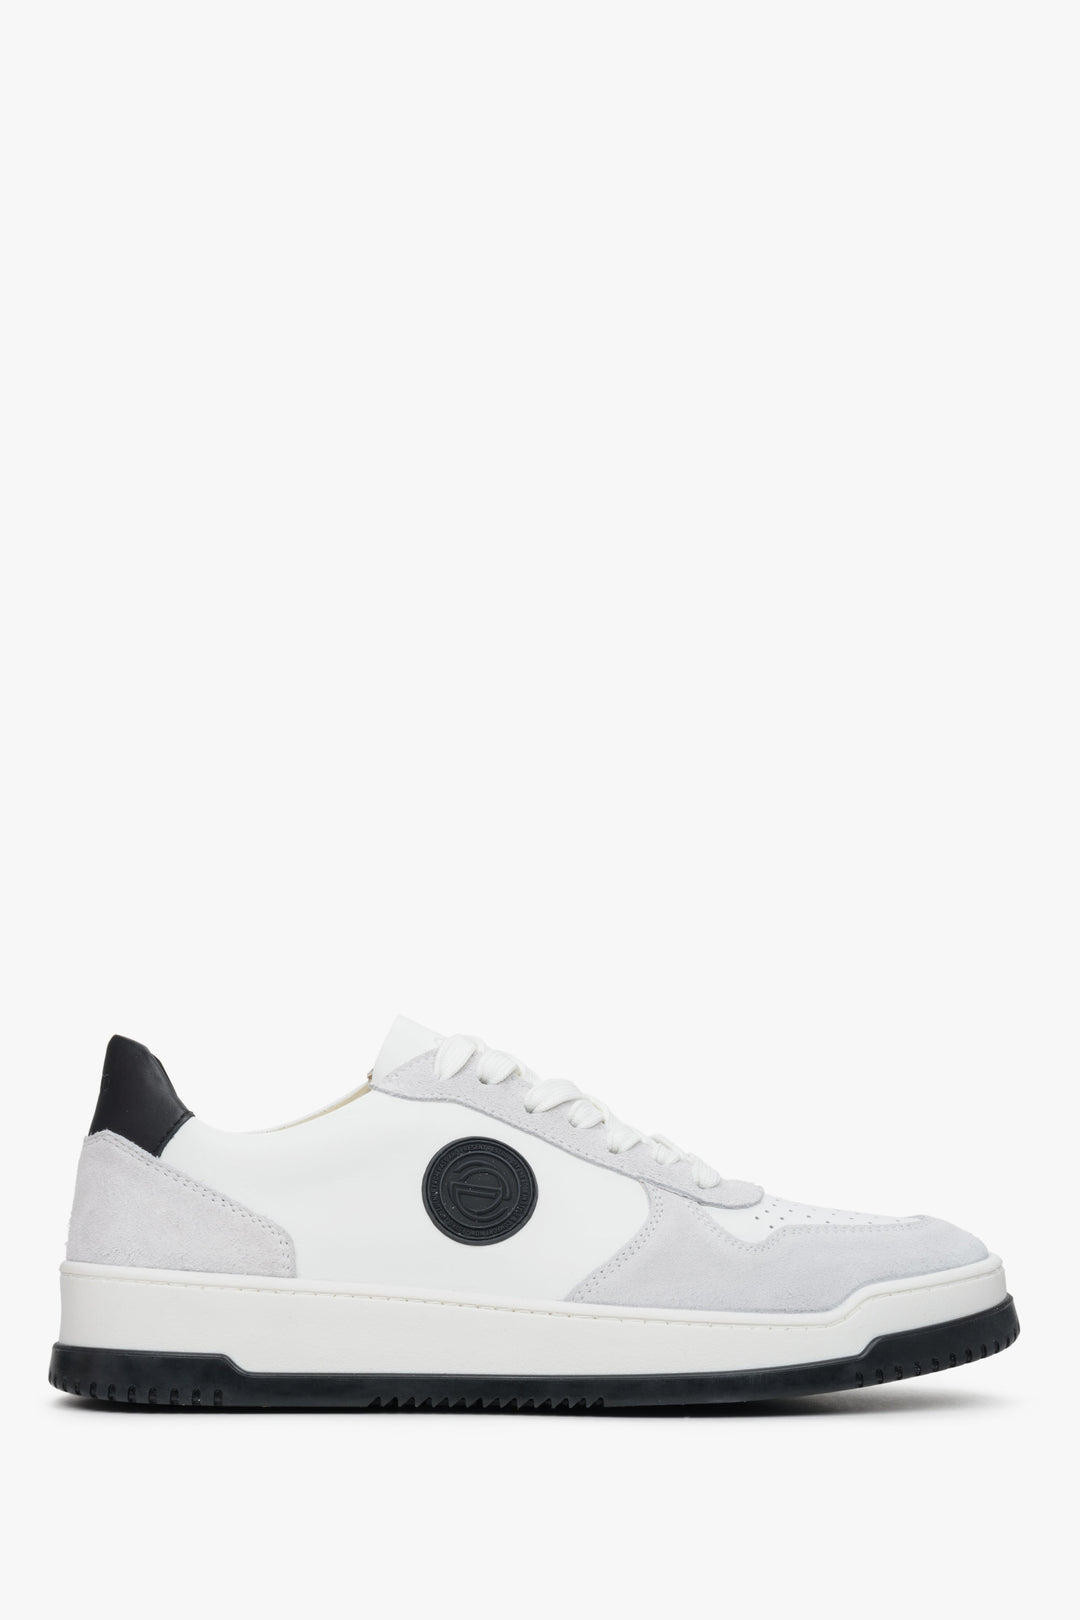 Grey & White Men's Sneakers made of Leather and Suede Estro ER00113018